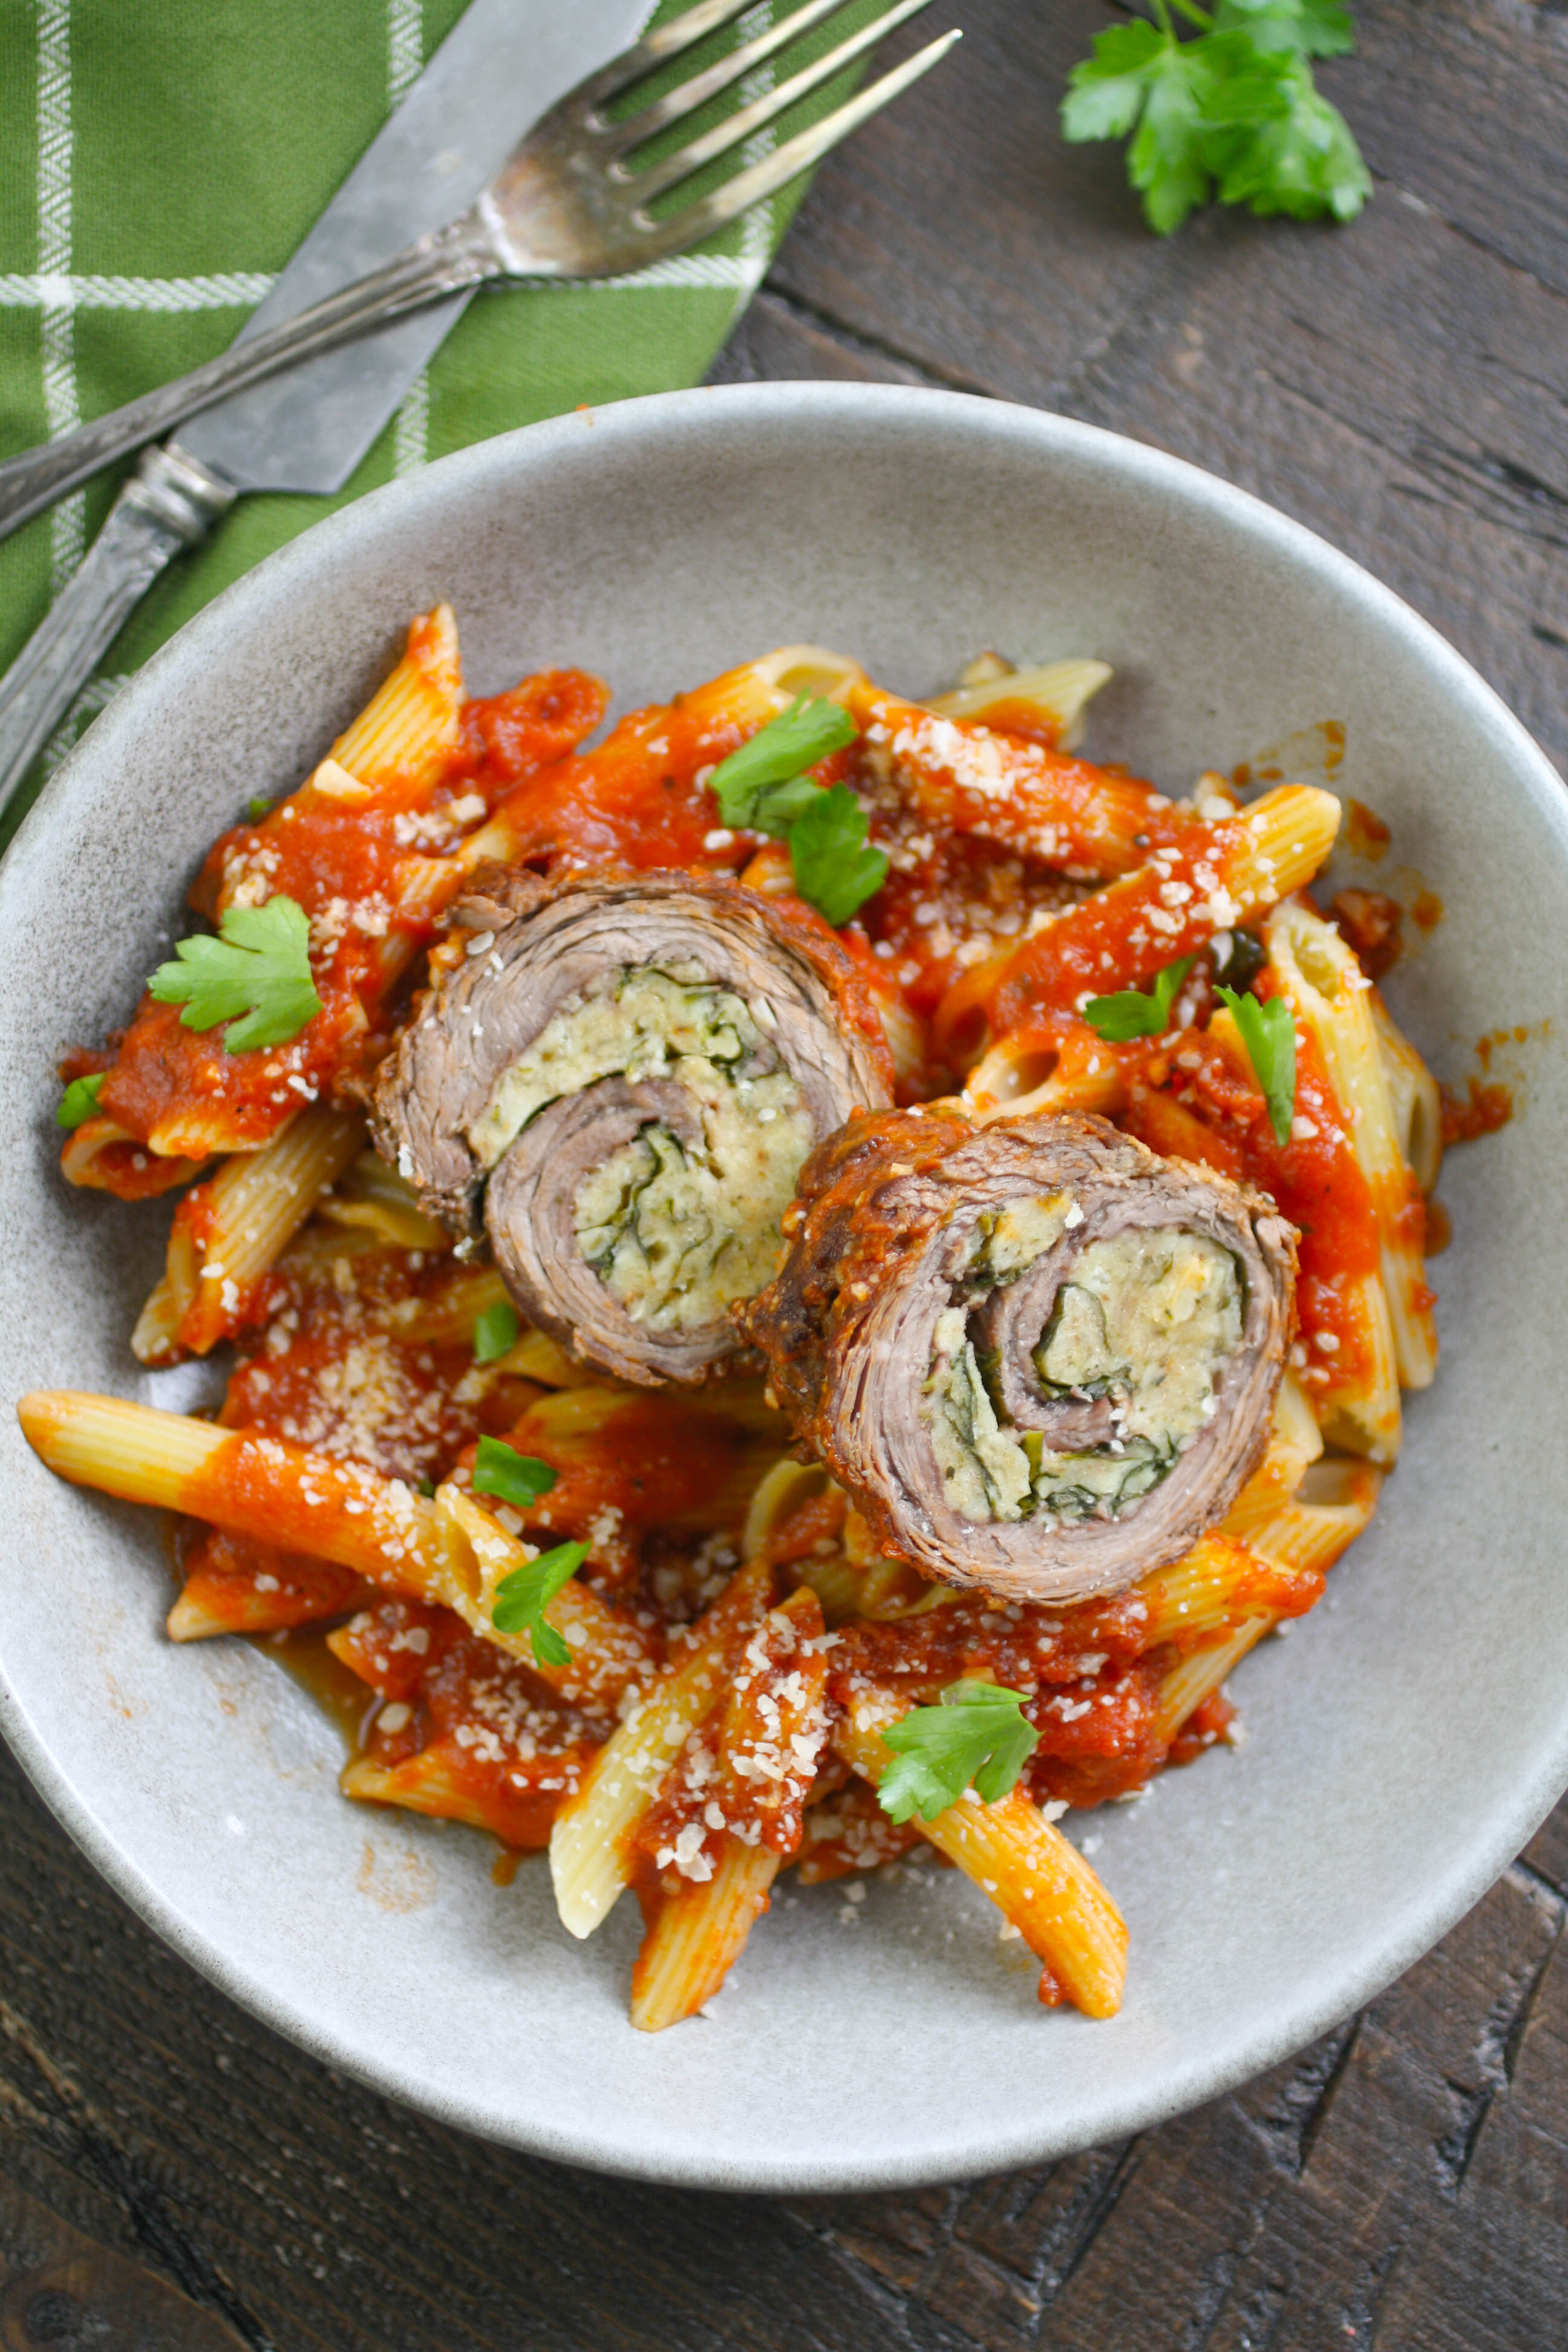 Beef Braciole is a tasty, classic Italian dish you'll love. Try this recipe for Beef Braciole soon.